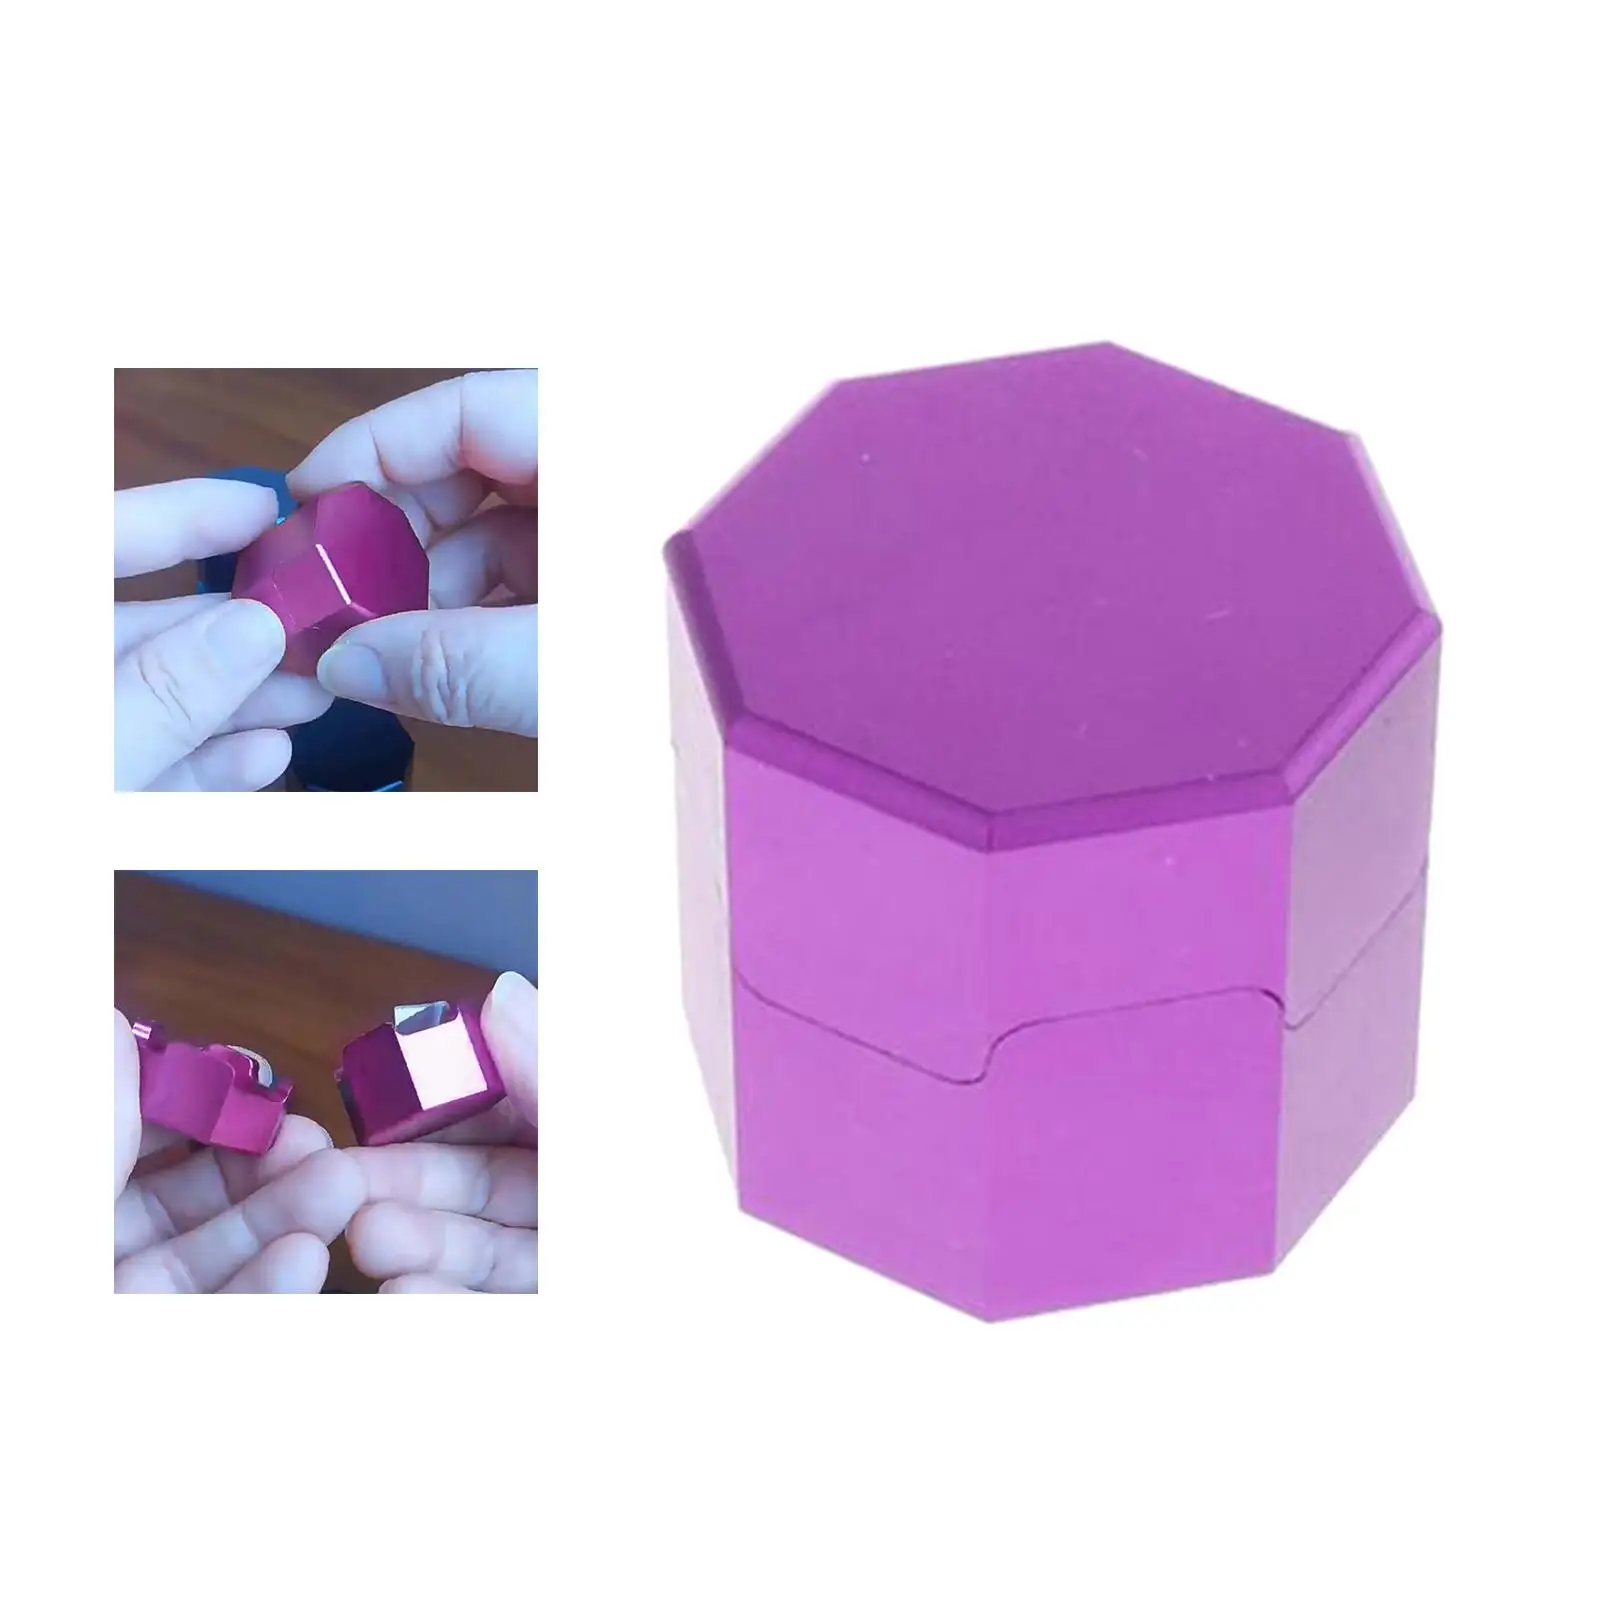 Billiard Cue Tip Chalk Pool Table Accessories Pocket Organizer Octagonal Small Octagonal Chalk Holder Portable for Snooker Pool